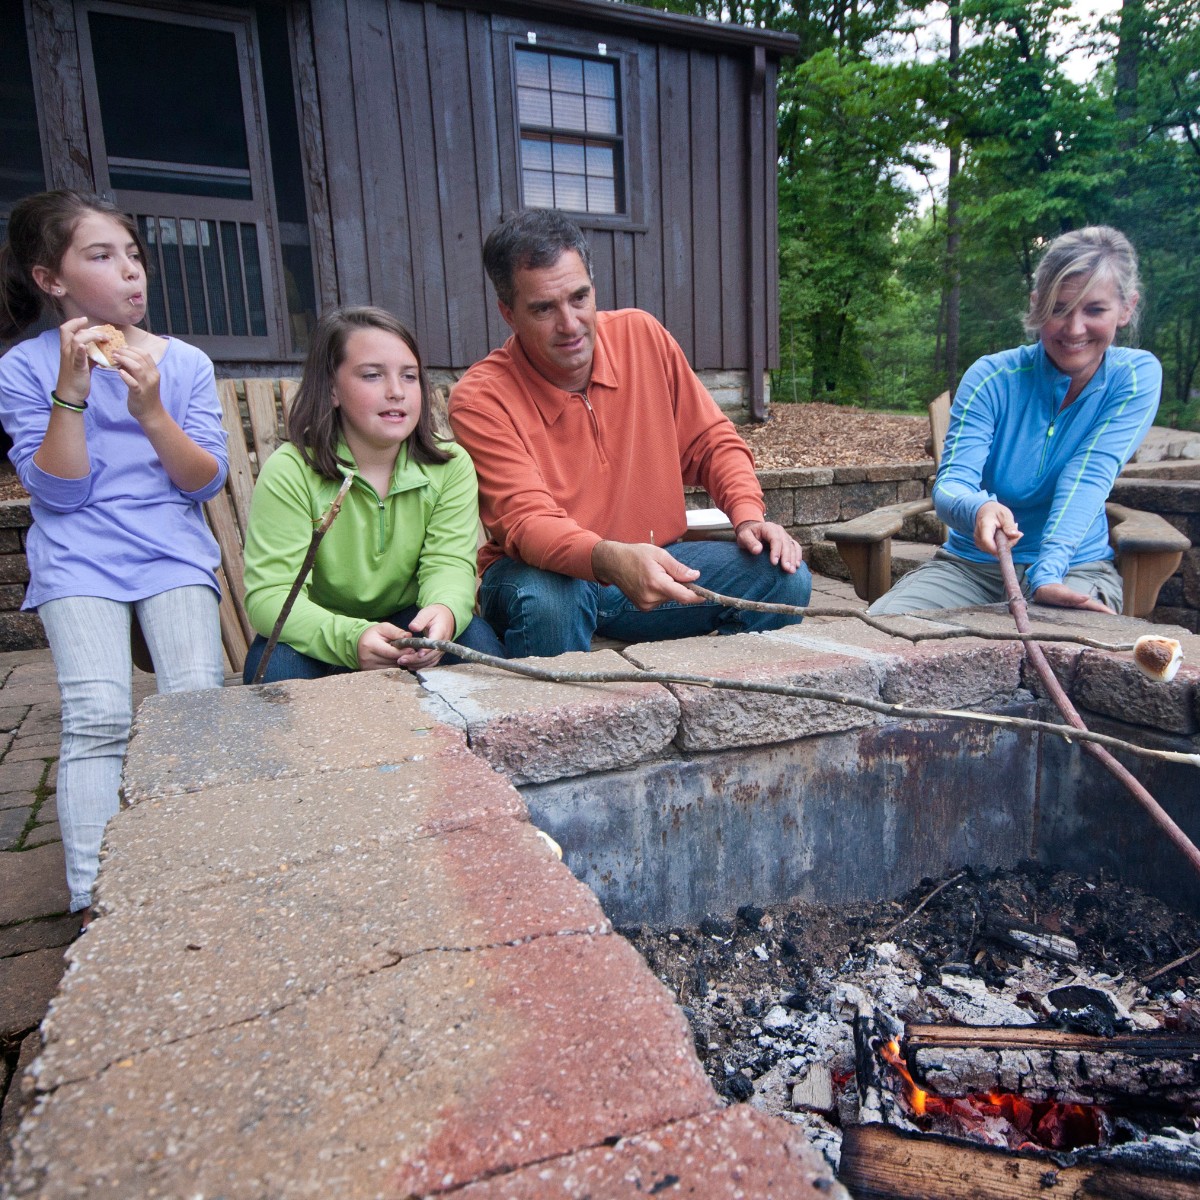 🚨LAST MINUTE TABLE ROCK CABIN & CAMPING SPECIAL!🚨 Take 25% off campsites and cabins at Table Rock State Park on stays from 4/10 to 4/18 with code TRSPRING. Book now 🔗 brnw.ch/21wIHuz or 📞 call from 9 a.m. to 5 p.m. 1-866-345-7275.